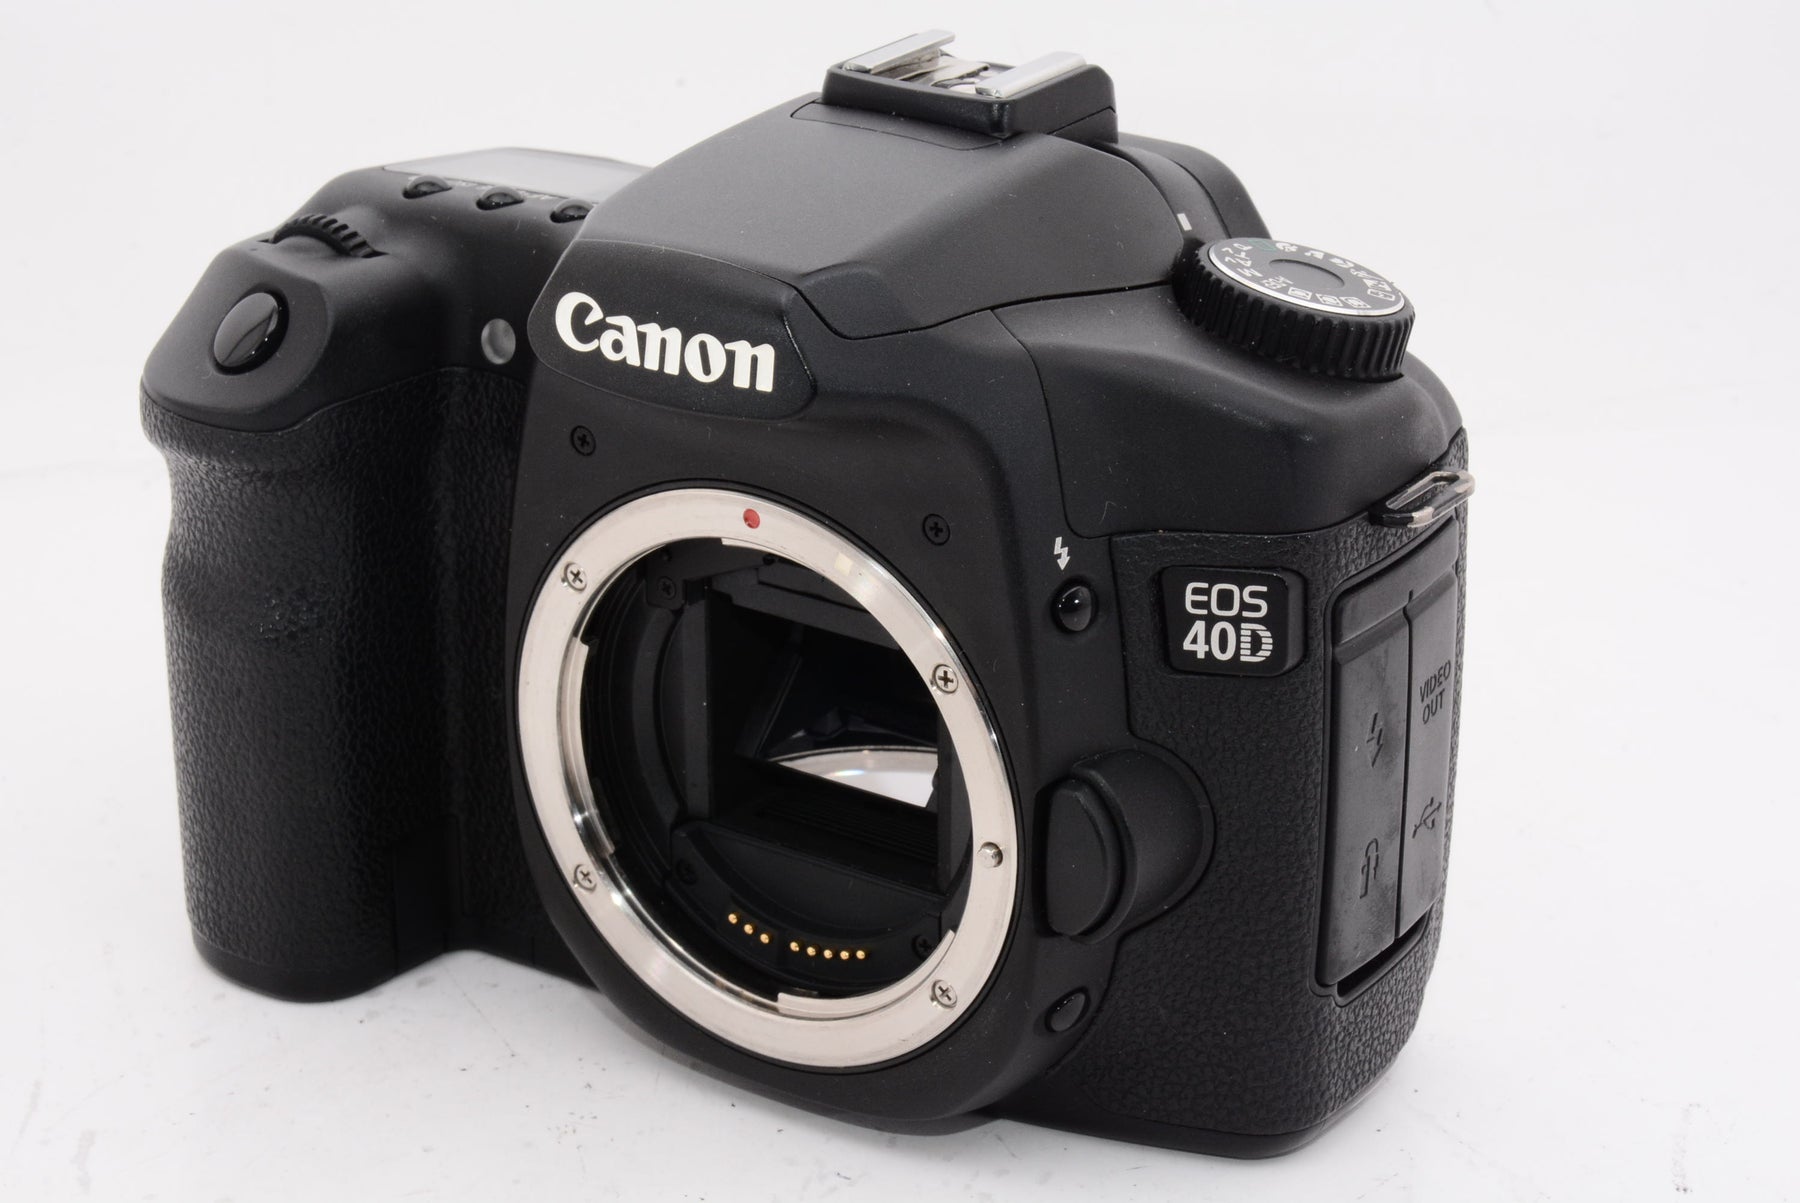  Canon EOS 40D 10.1MP Digital SLR Camera with EF 28-135mm  f/3.5-5.6 IS USM Standard Zoom Lens : Electronics